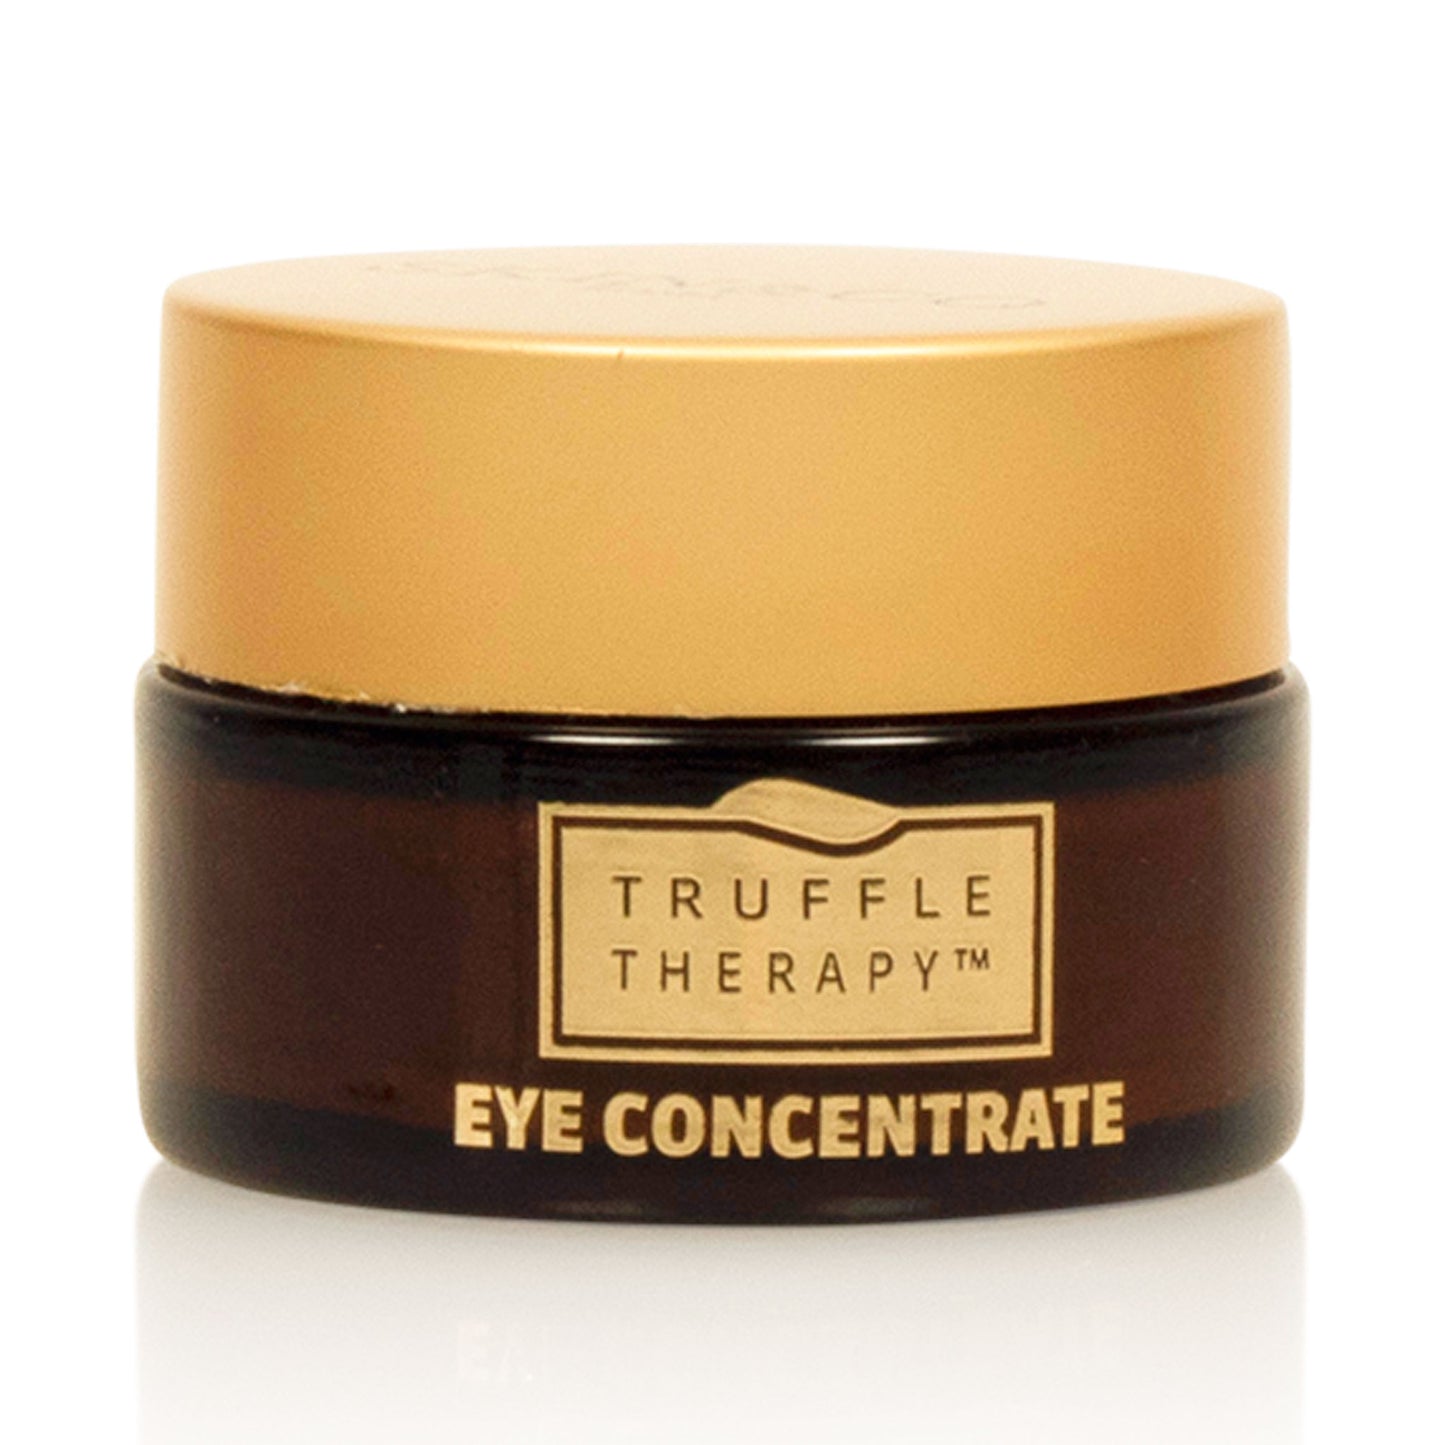 SKIN & CO EYE CONCENTRATE TRUFFLE THERAPY